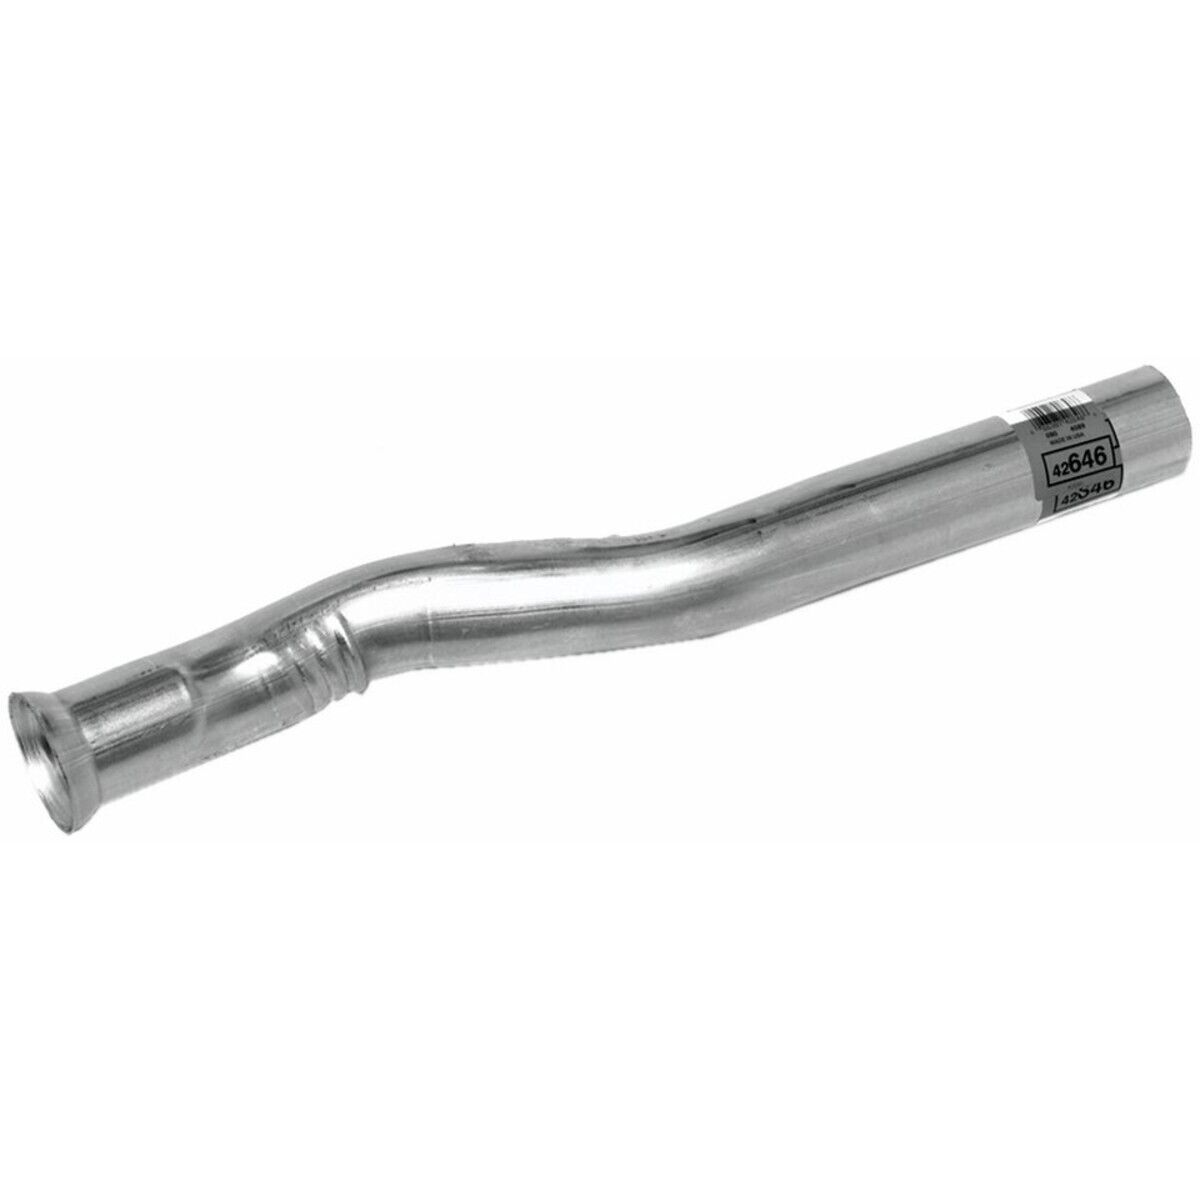 42646 Walker Exhaust Pipe for Chevy S10 Pickup S15 Chevrolet S-10 GMC Sonoma